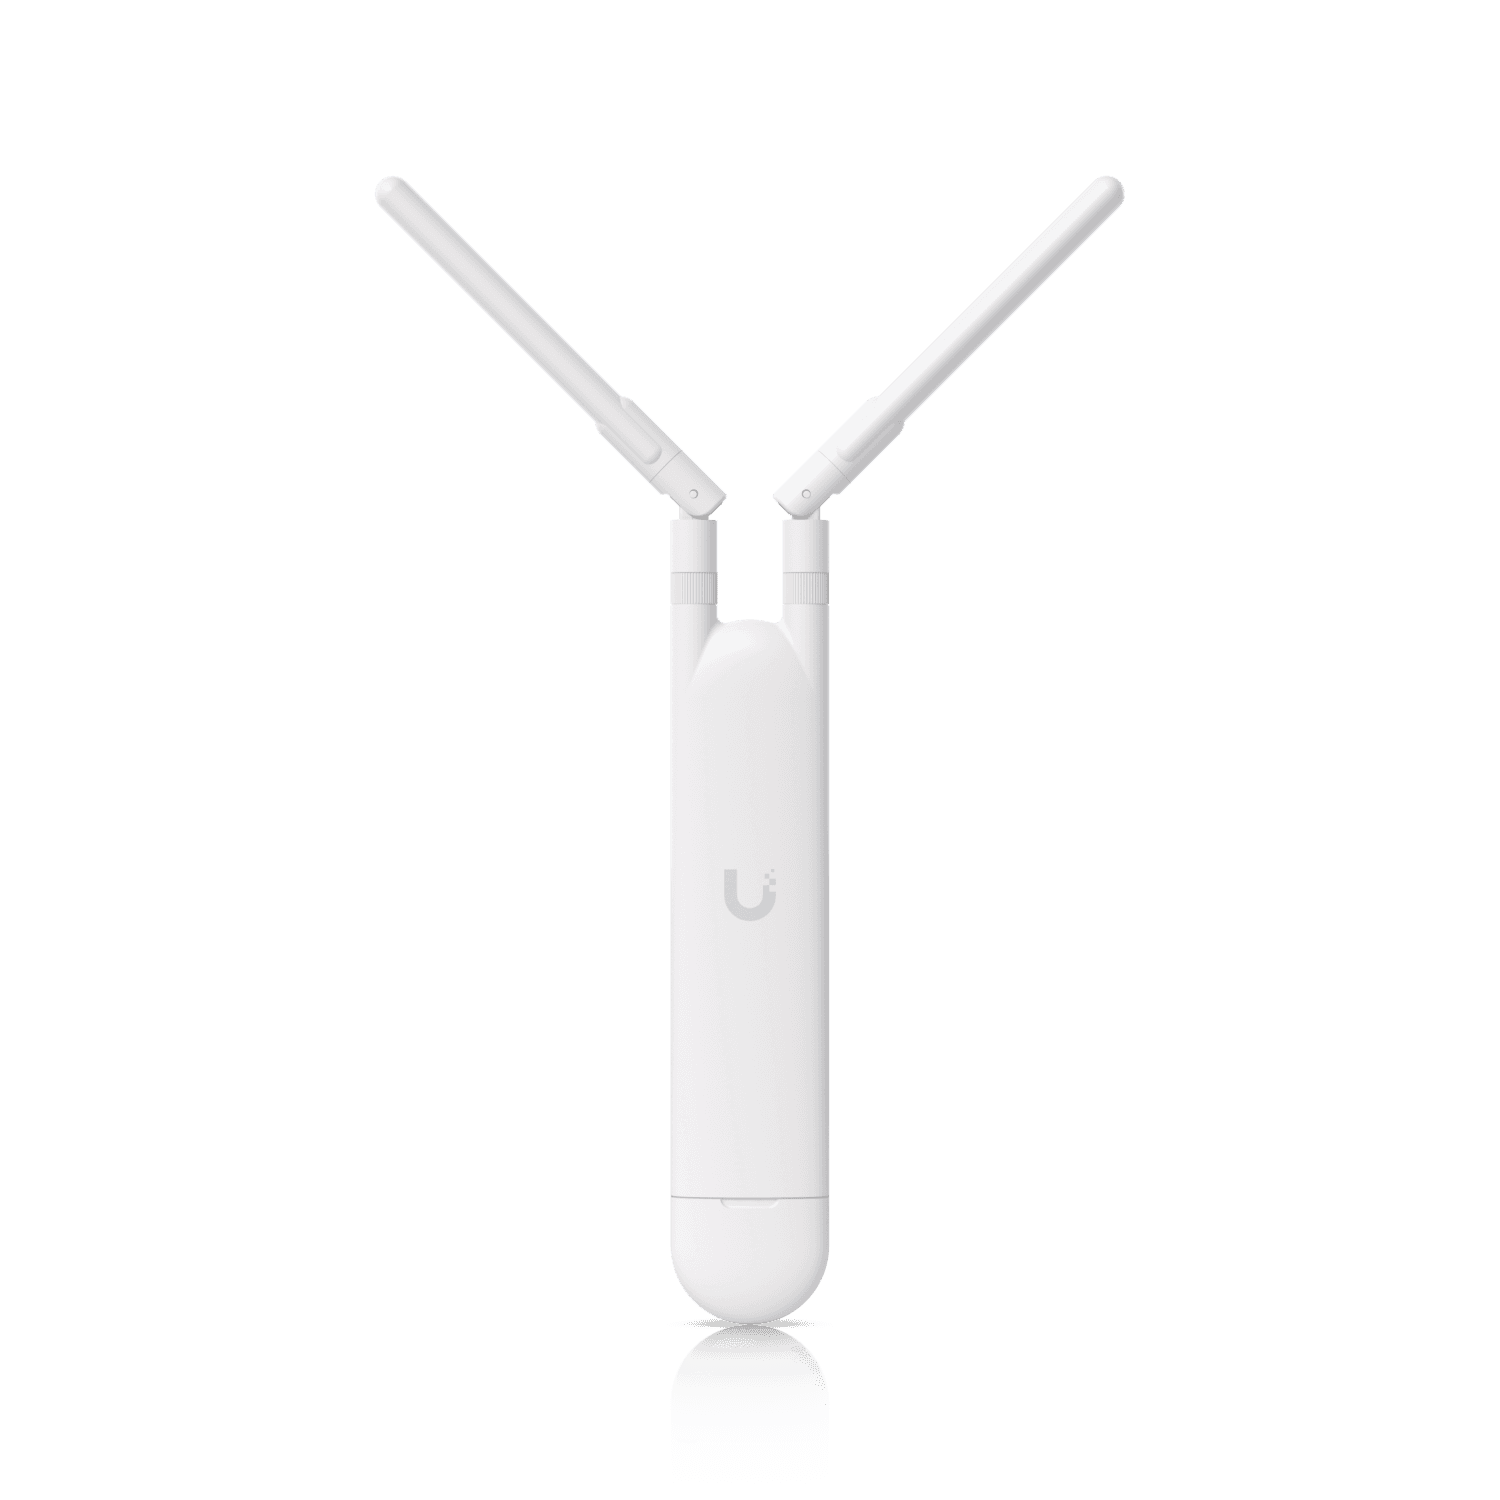 Swiss Army Knife Ultra debuts as new Ubiquiti access point